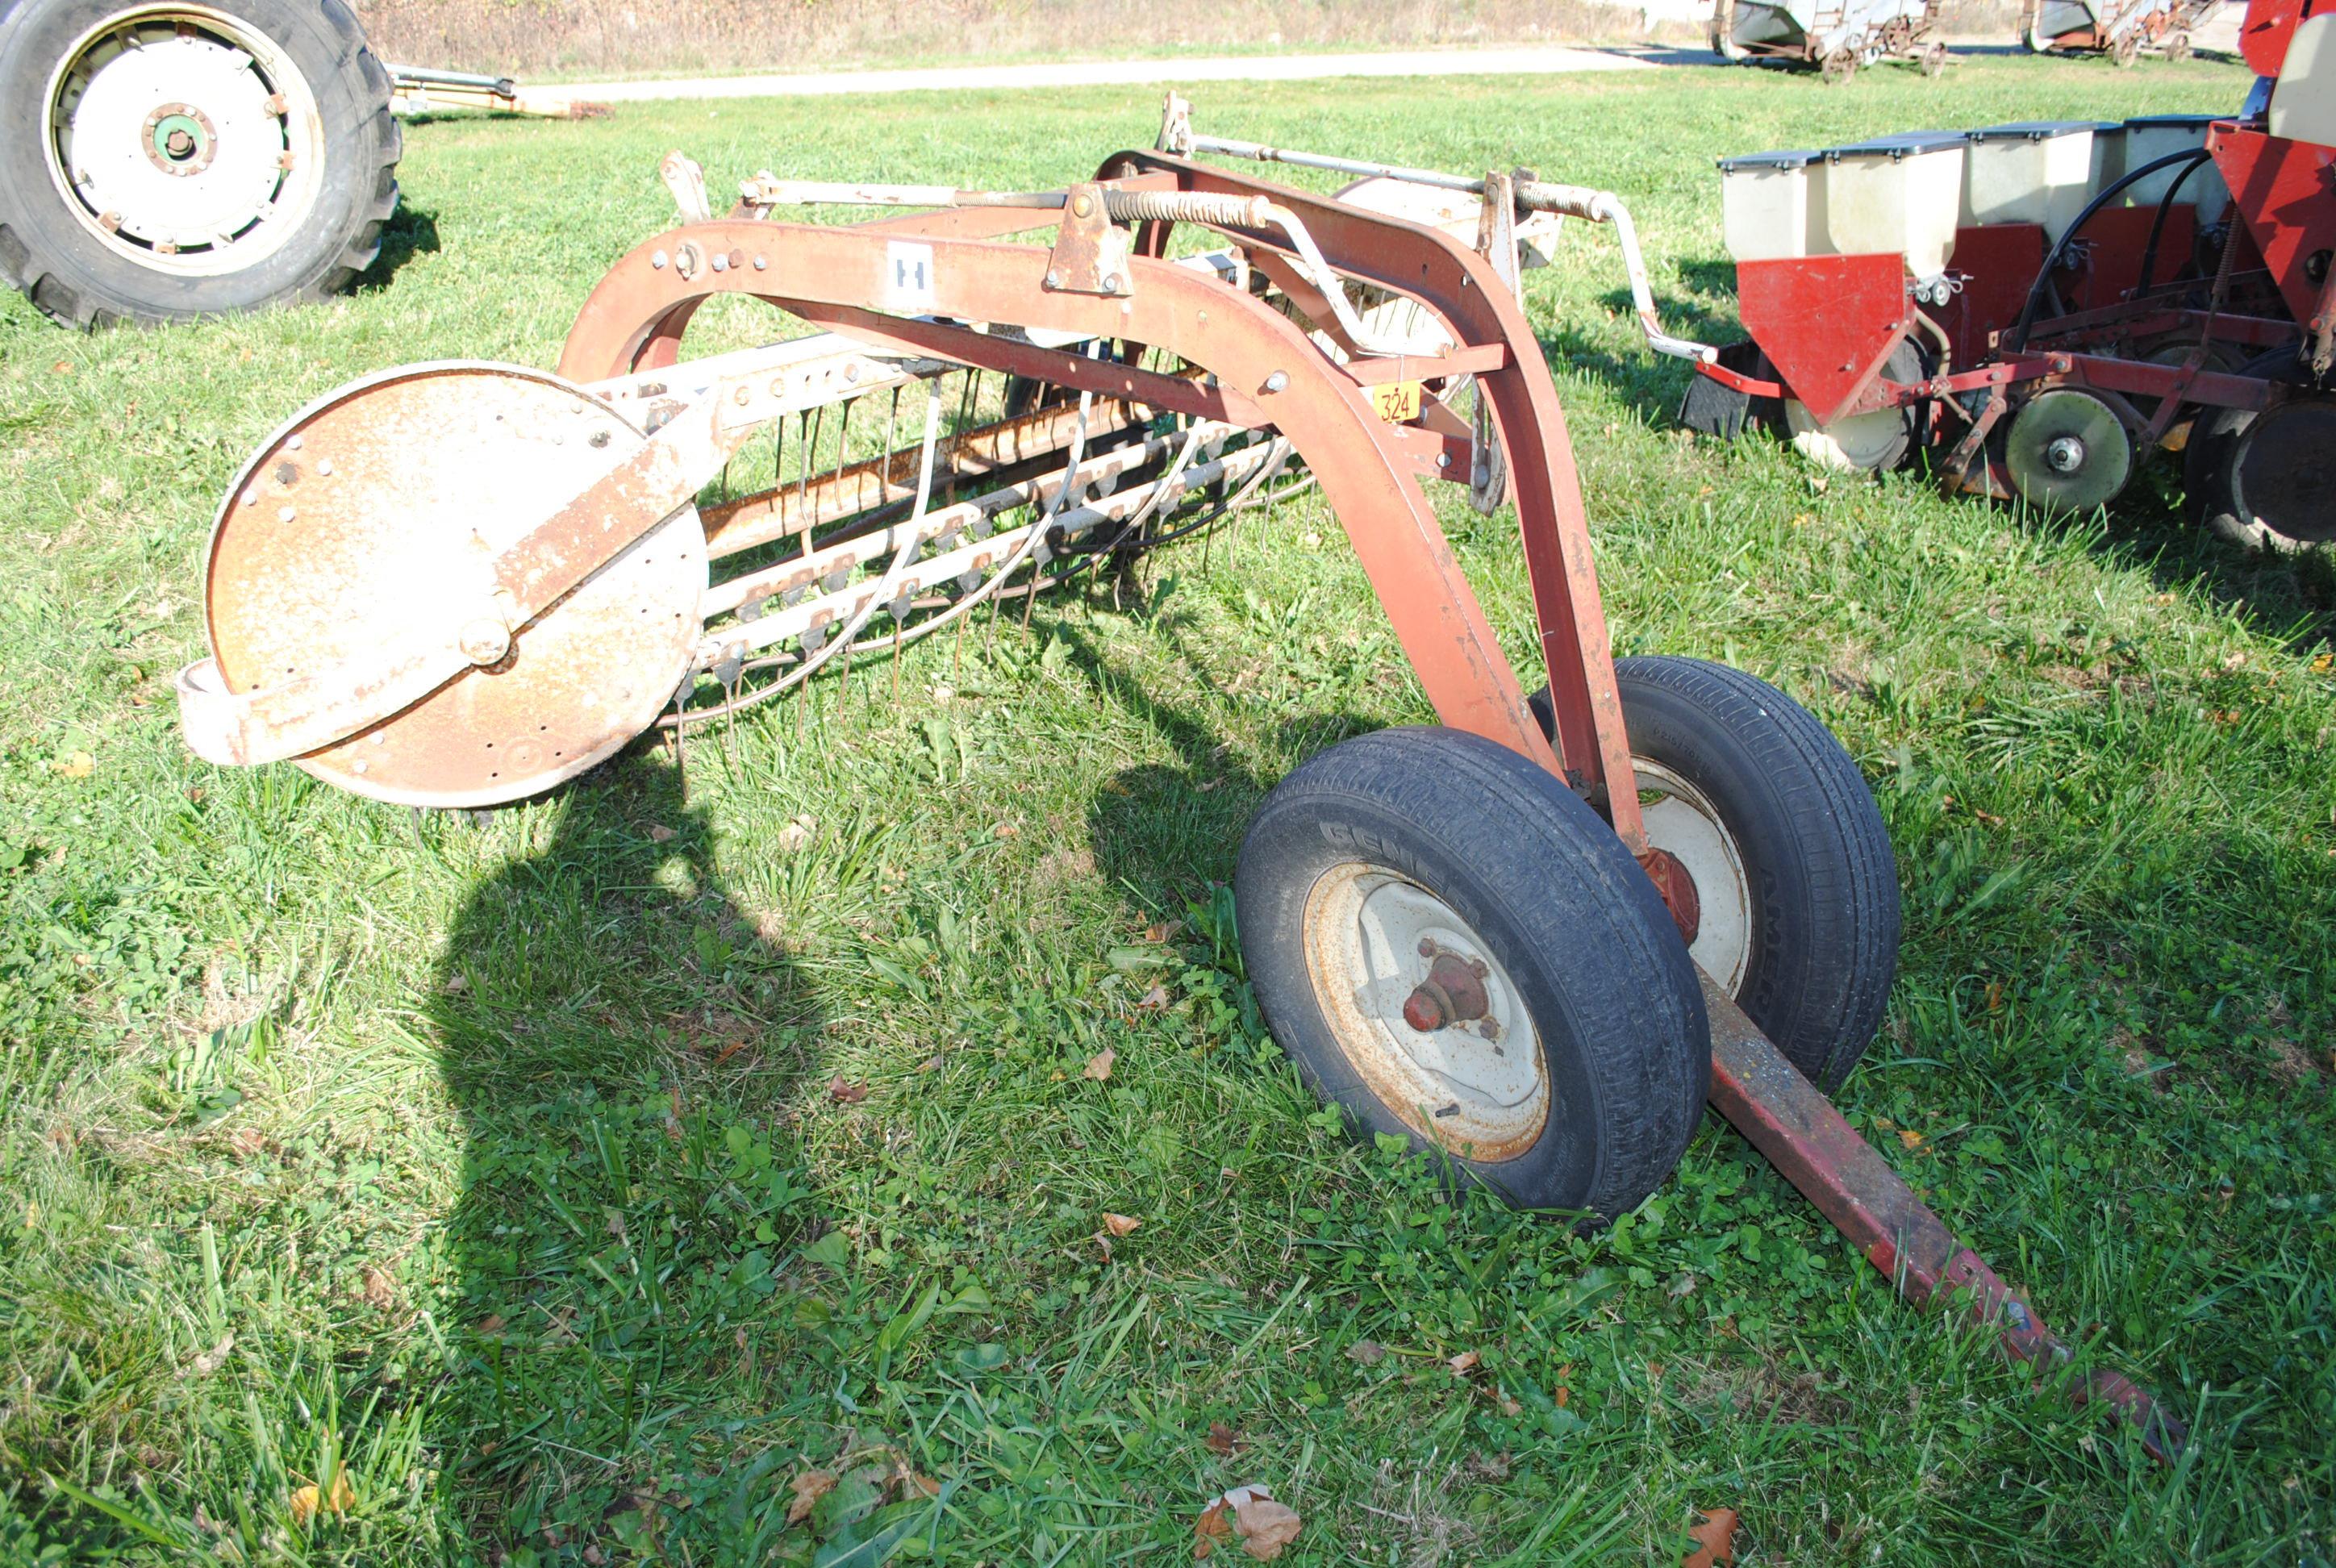 IH #35 rake with front dolly wheels, rubber mounted teeth